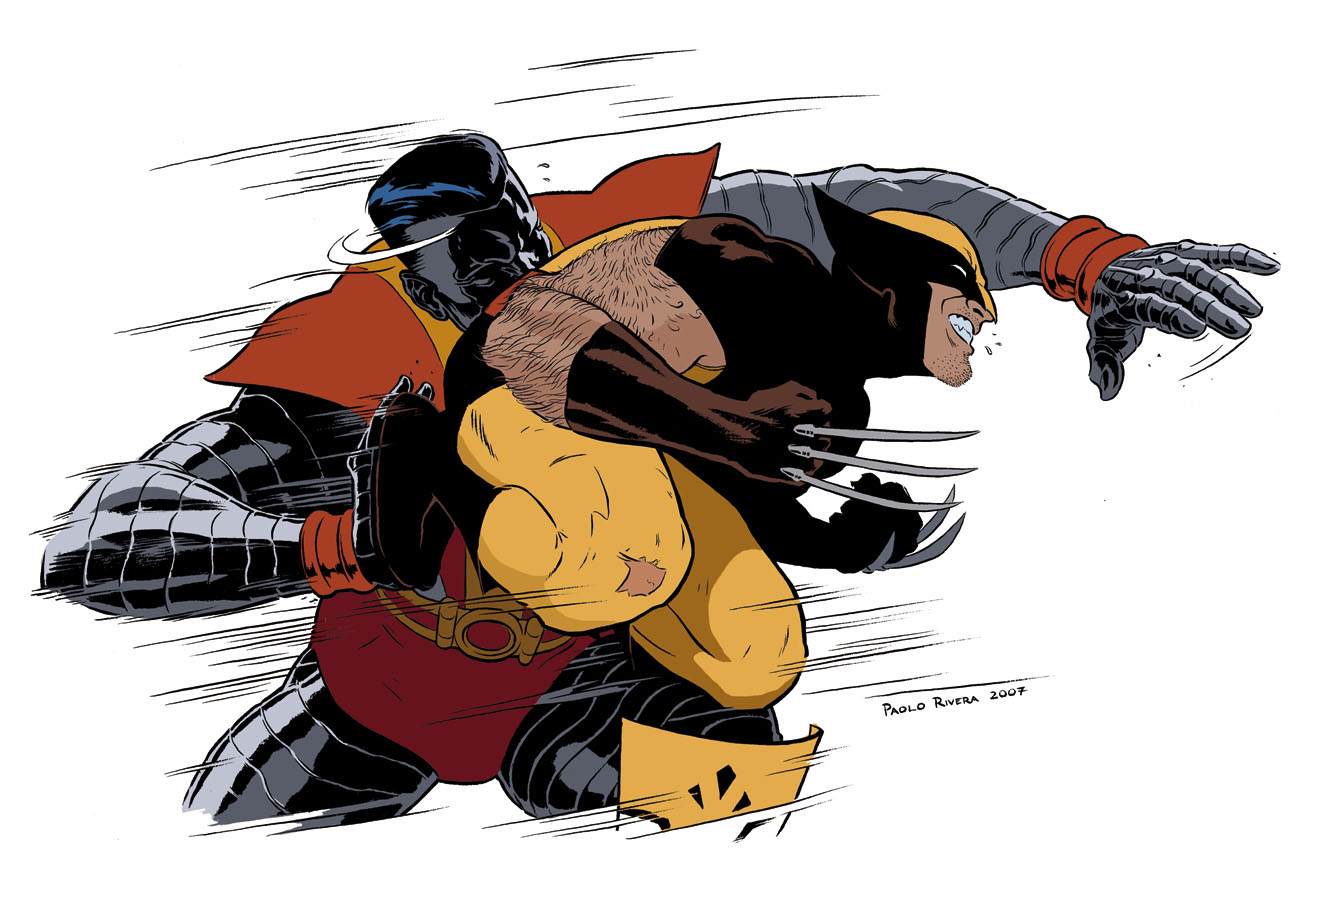 [Fastball_Special_2007_col.jpg]